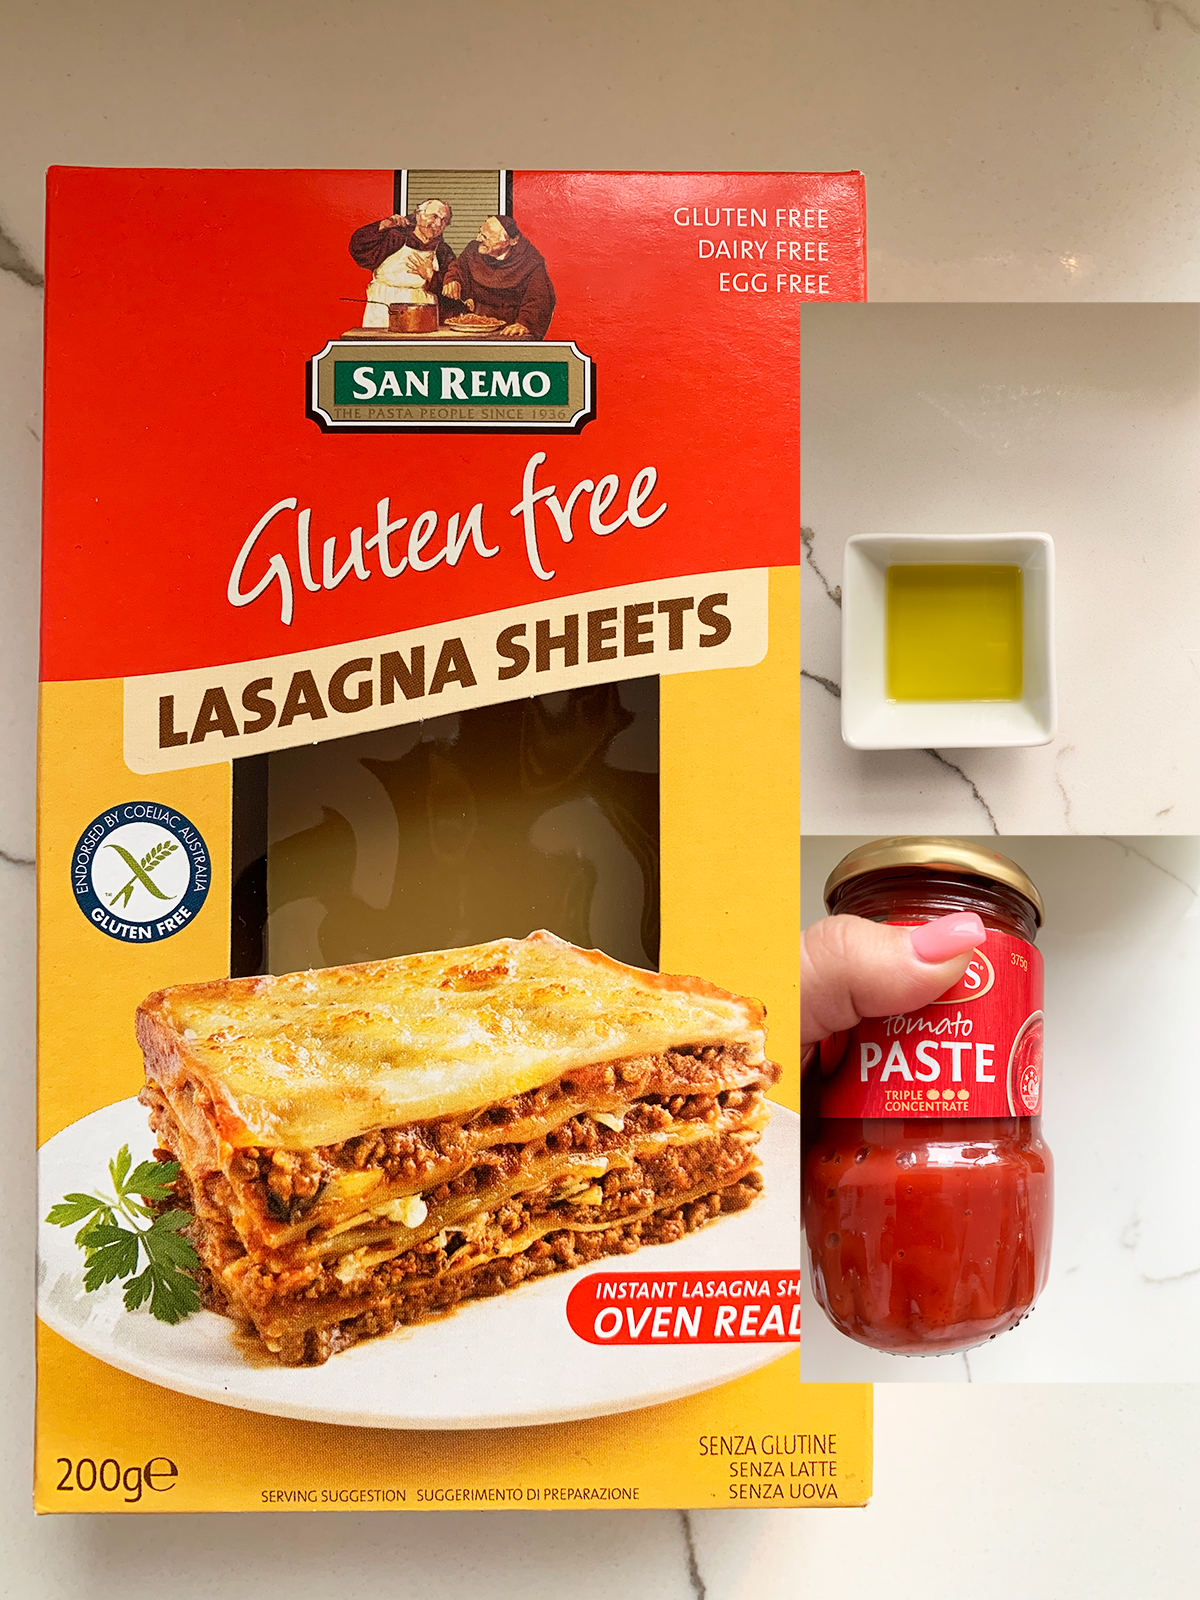 Olive oil, tomato paste and gluten free pasta sheets